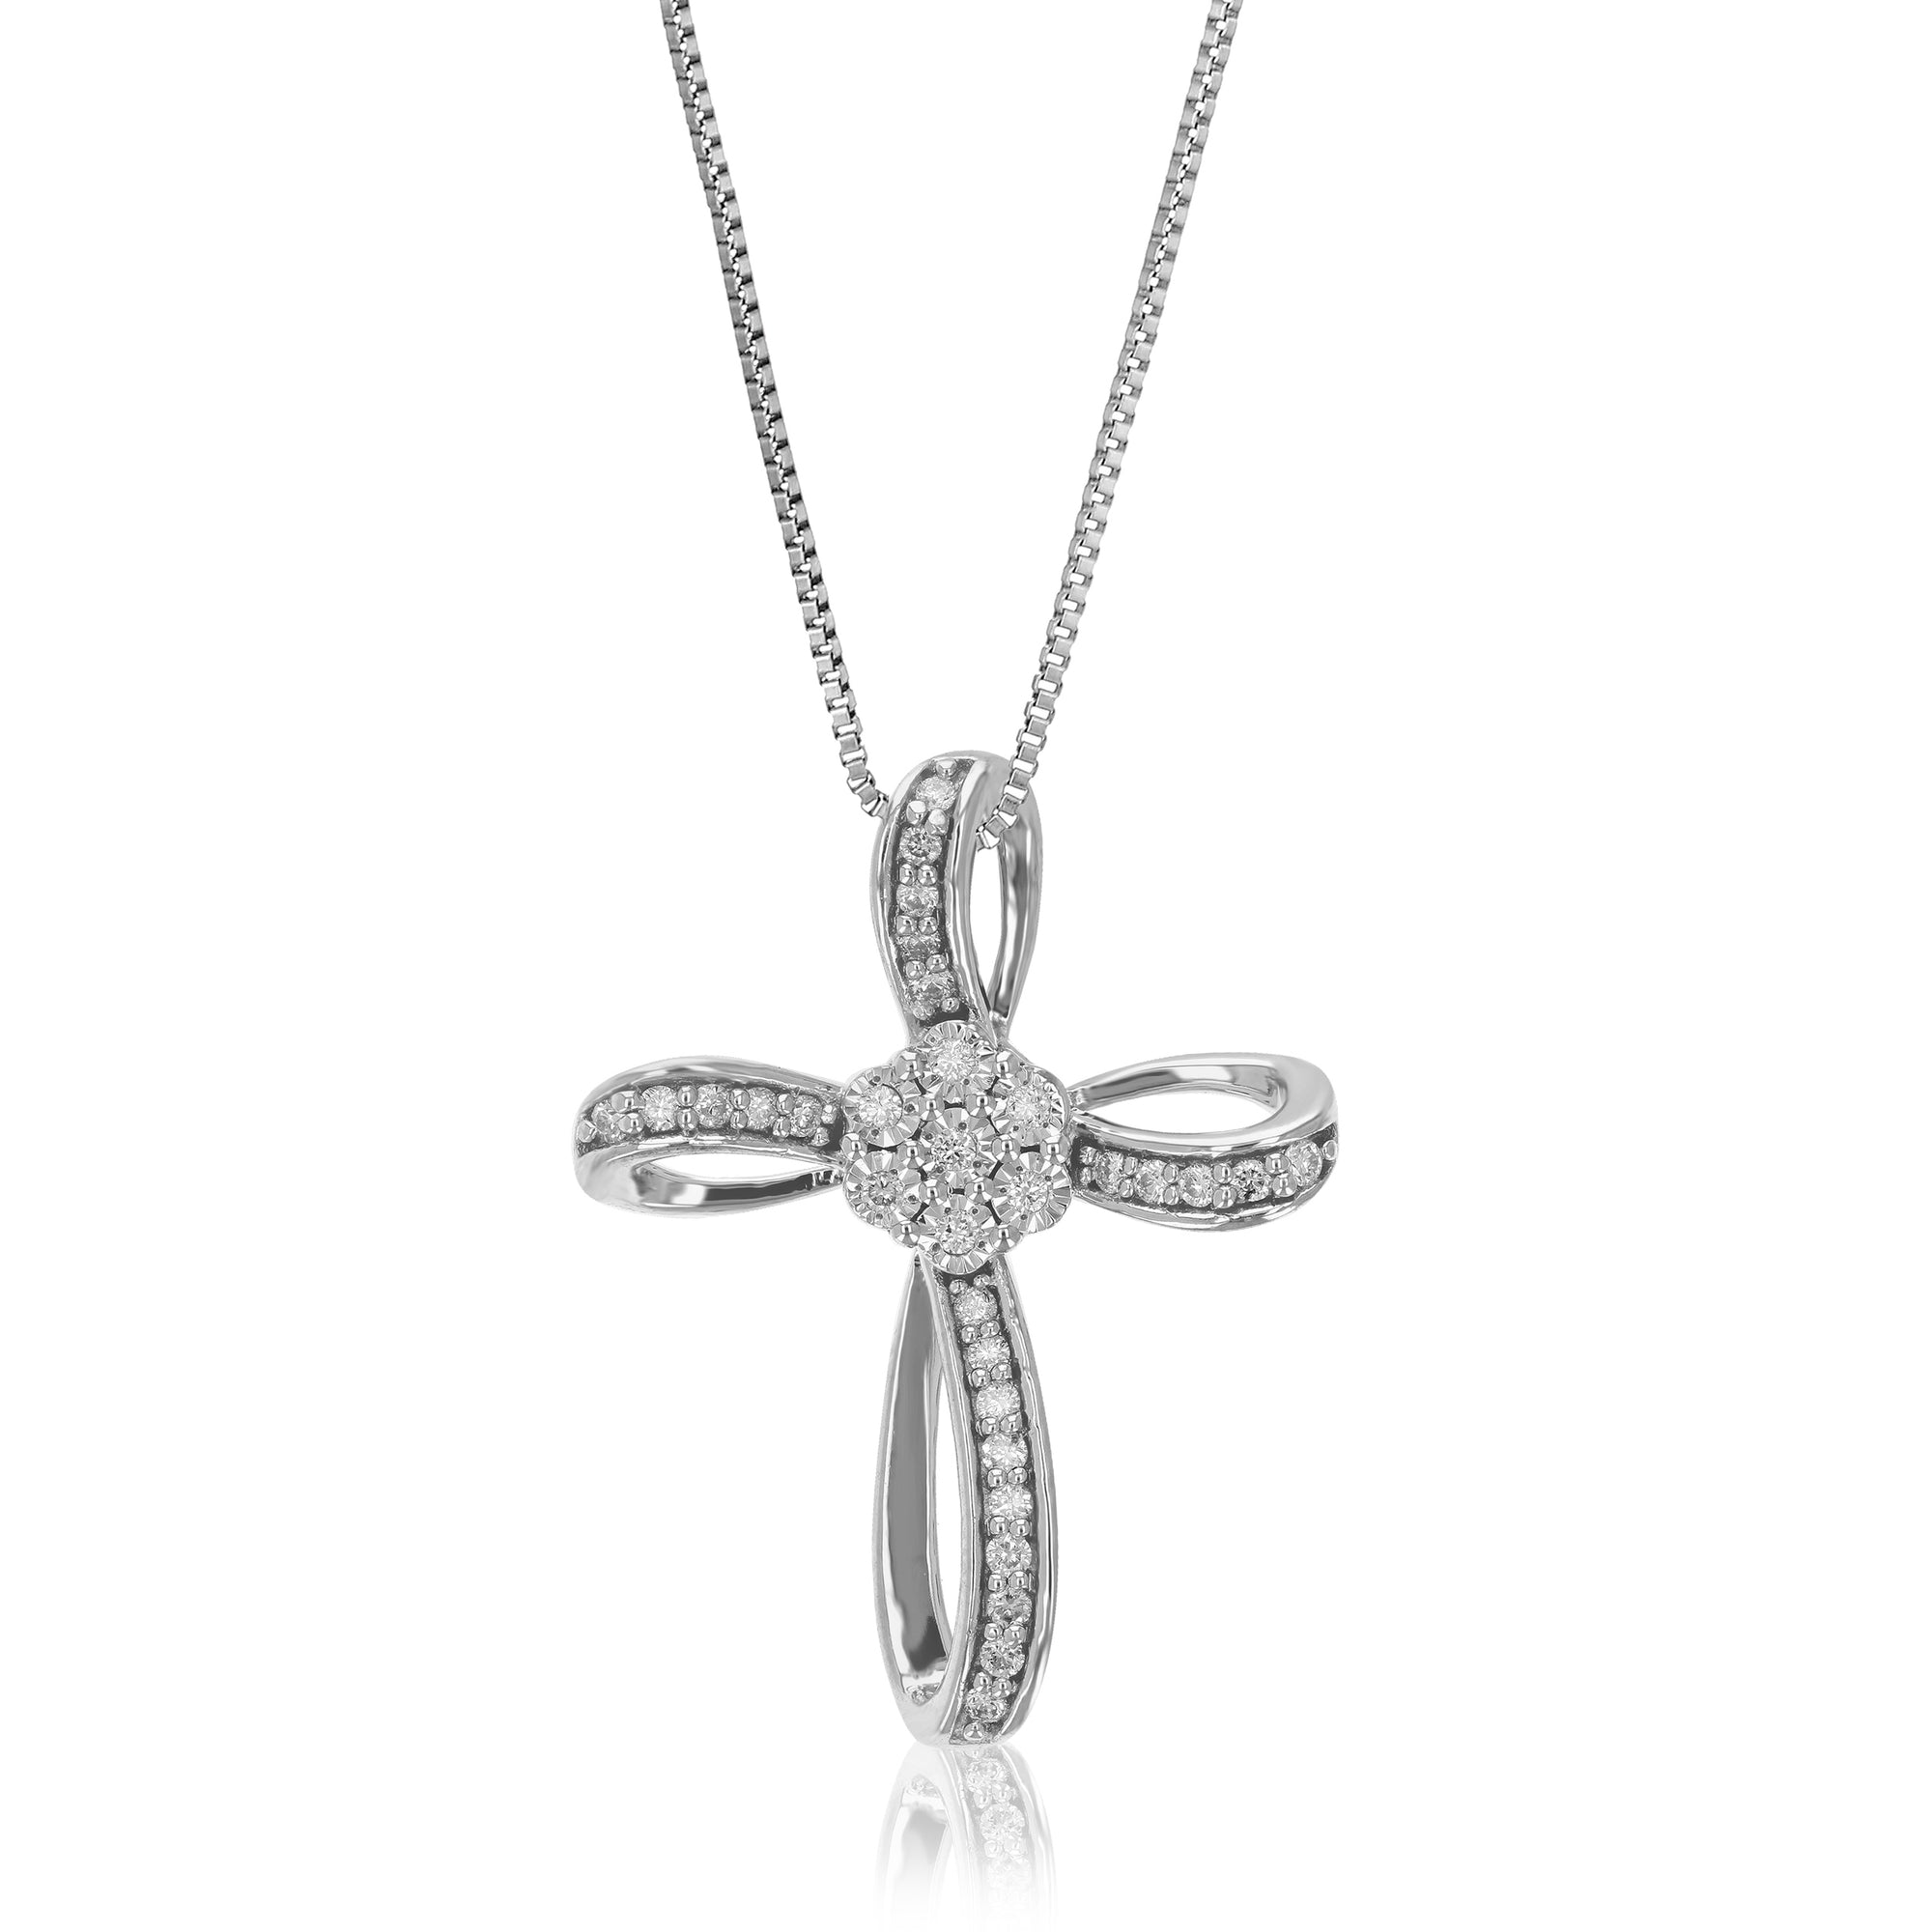 1/6 cttw Diamond Pendant Necklace for Women, Lab Grown Diamond Cross Pendant Necklace in .925 Sterling Silver with Chain, Size 1 Inch